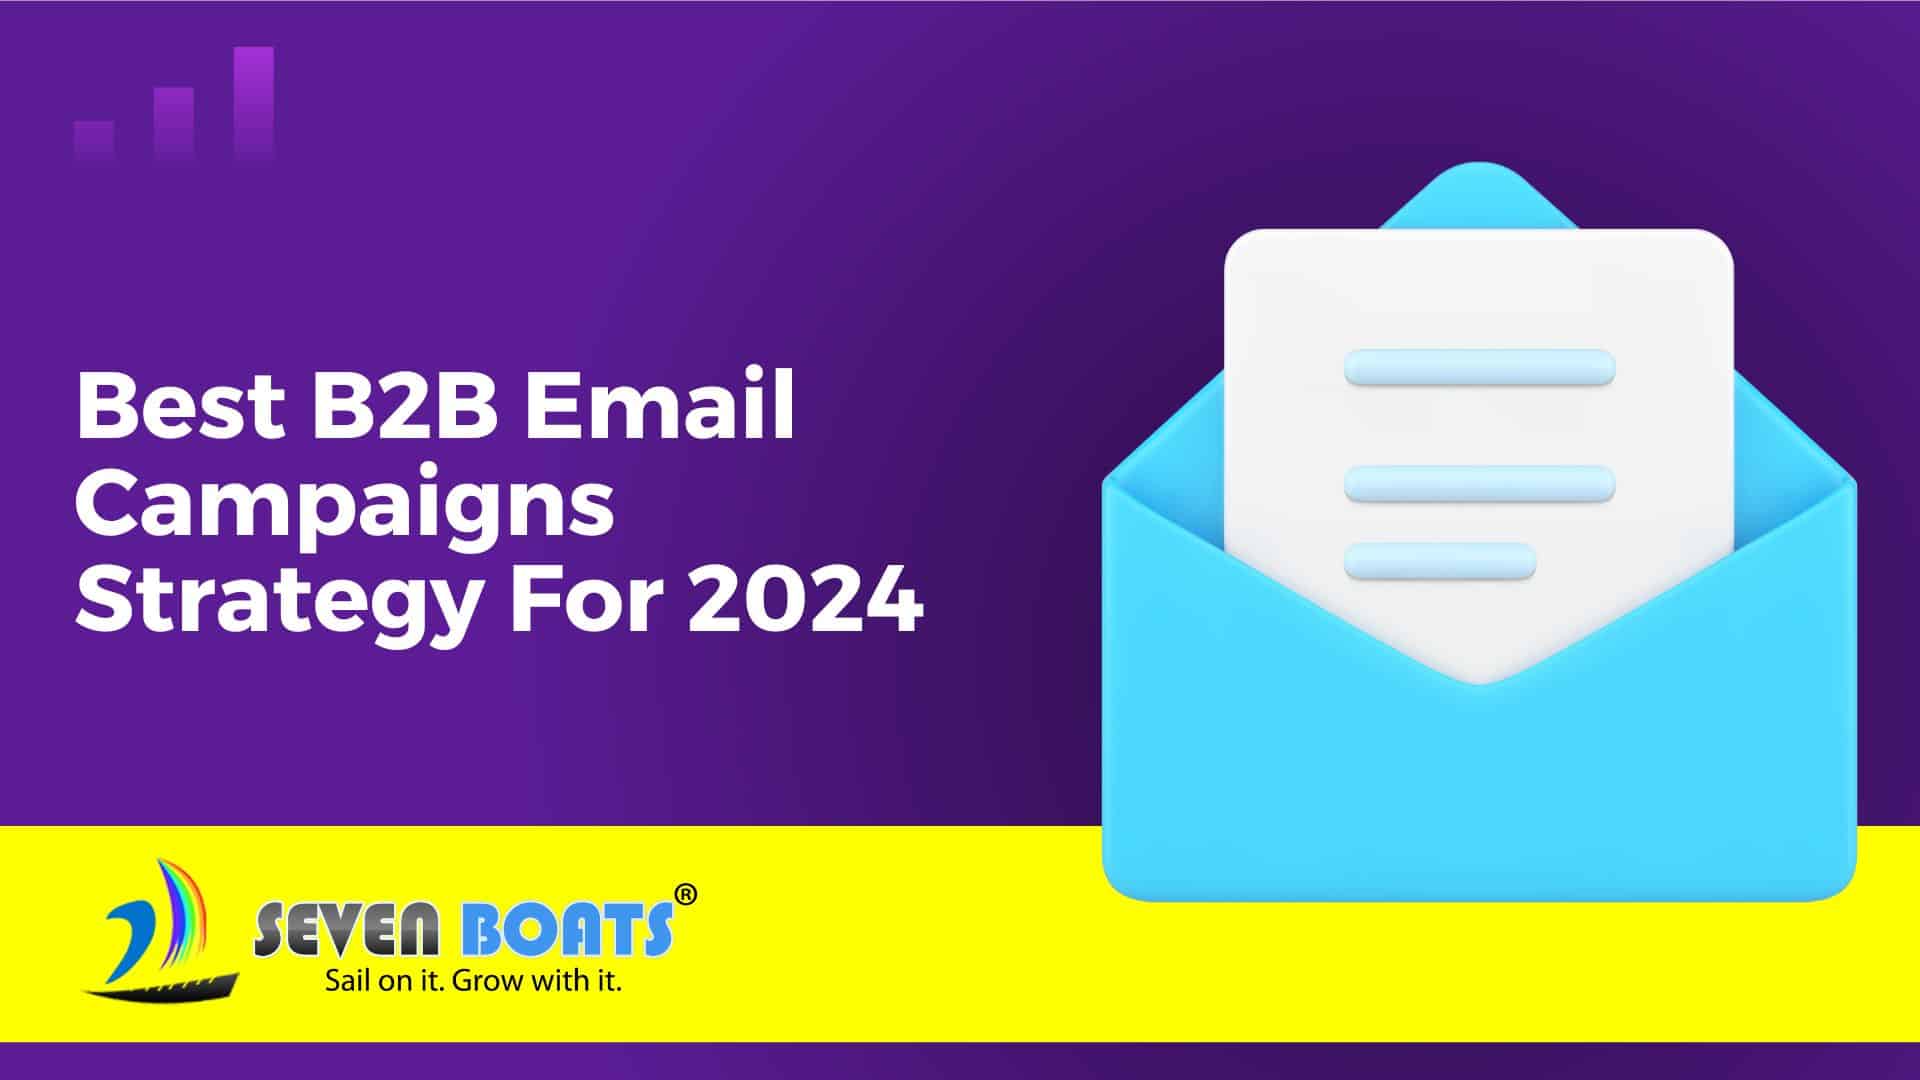 Best B2B Email Campaigns Strategy For 2024